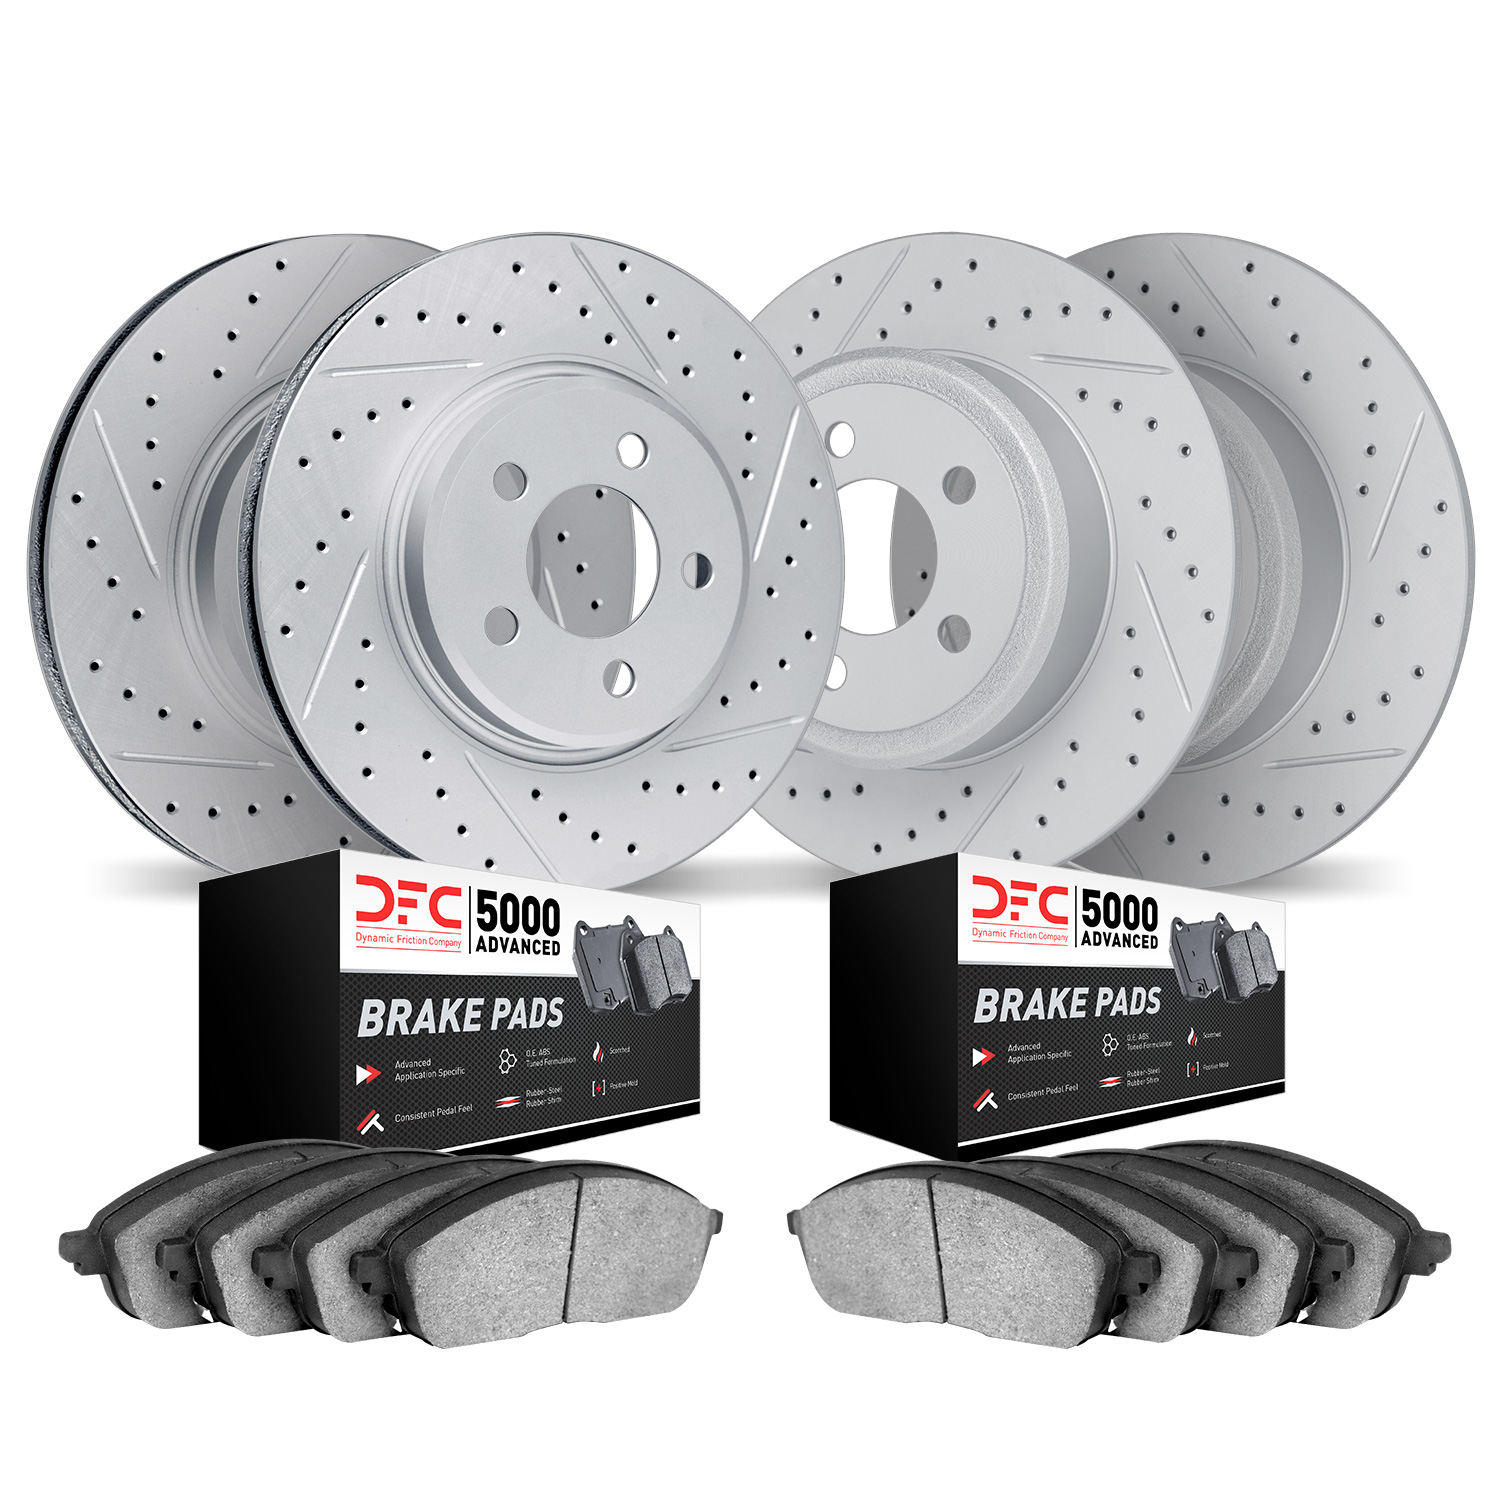 2504-76091 Geoperformance Drilled/Slotted Rotors w/5000 Advanced Brake Pads Kit, 2003-2006 Lexus/Toyota/Scion, Position: Front a